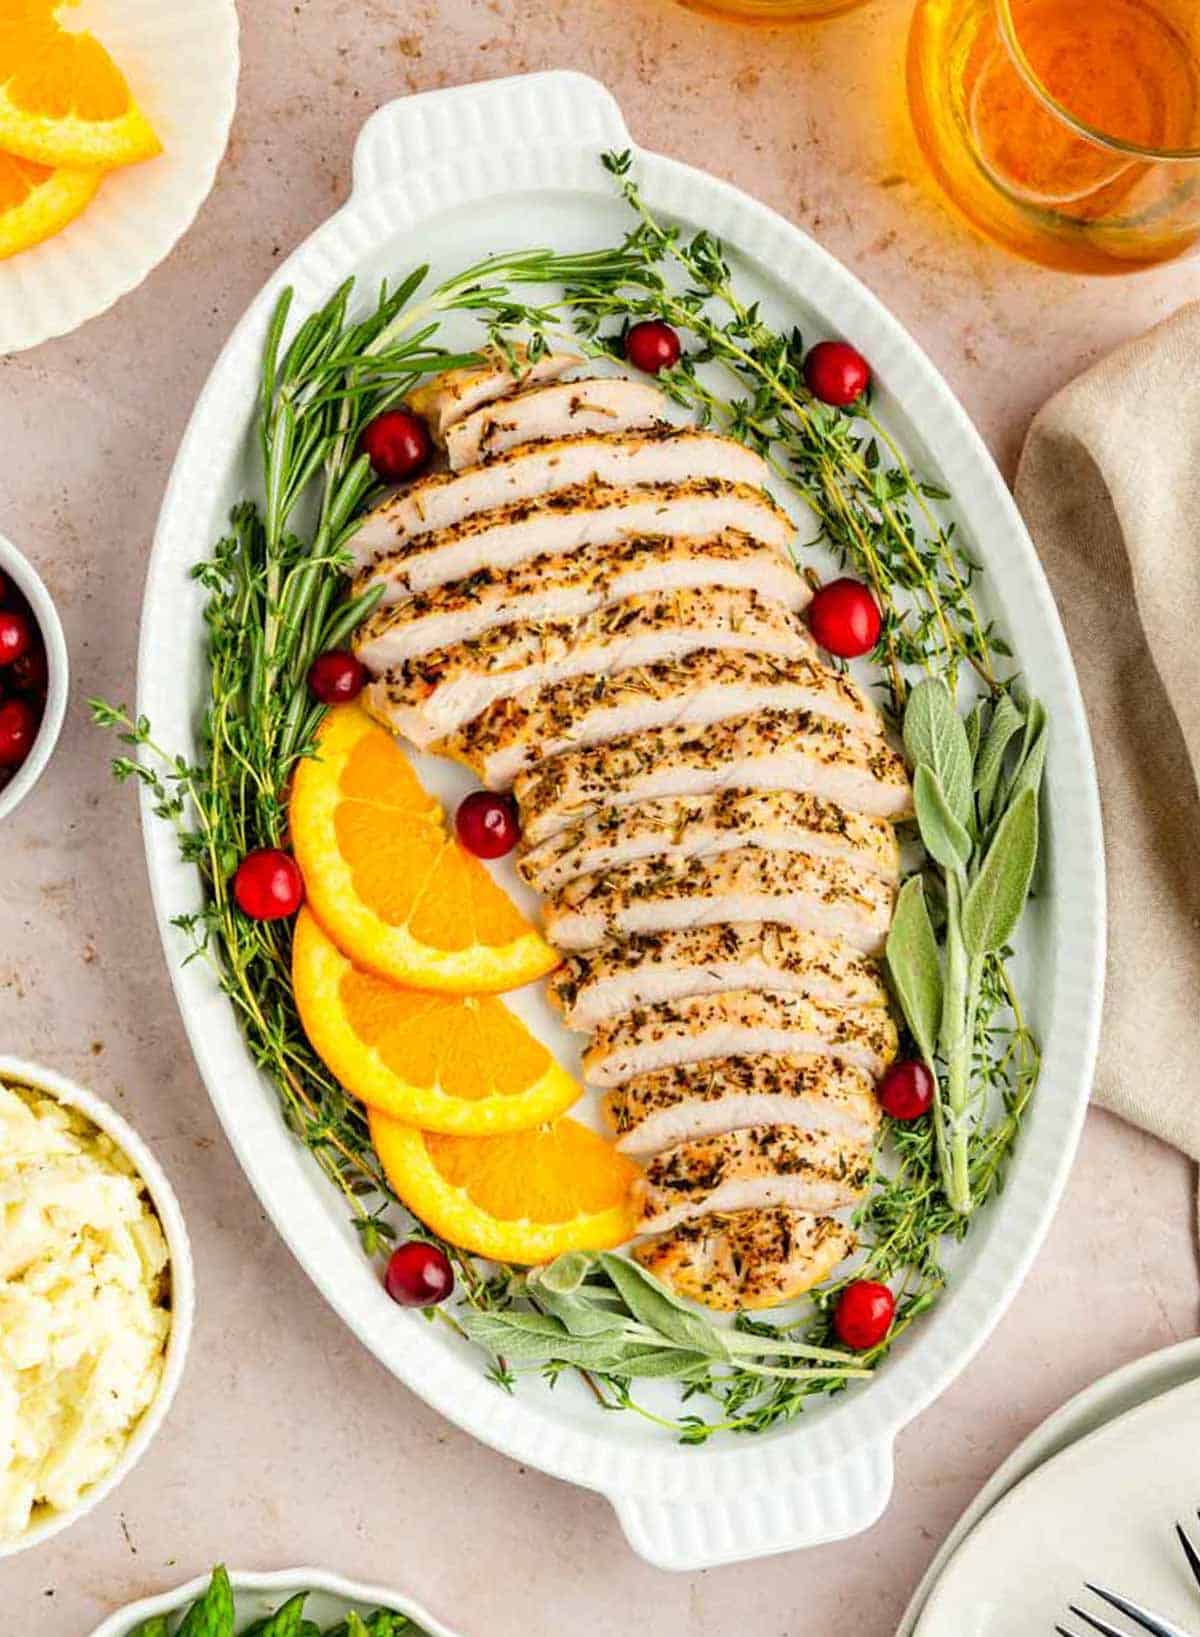 Garlic herbed sliced turkey on a beautiful white platter garnished with fresh herbs, sliced oranges, and cranberries.